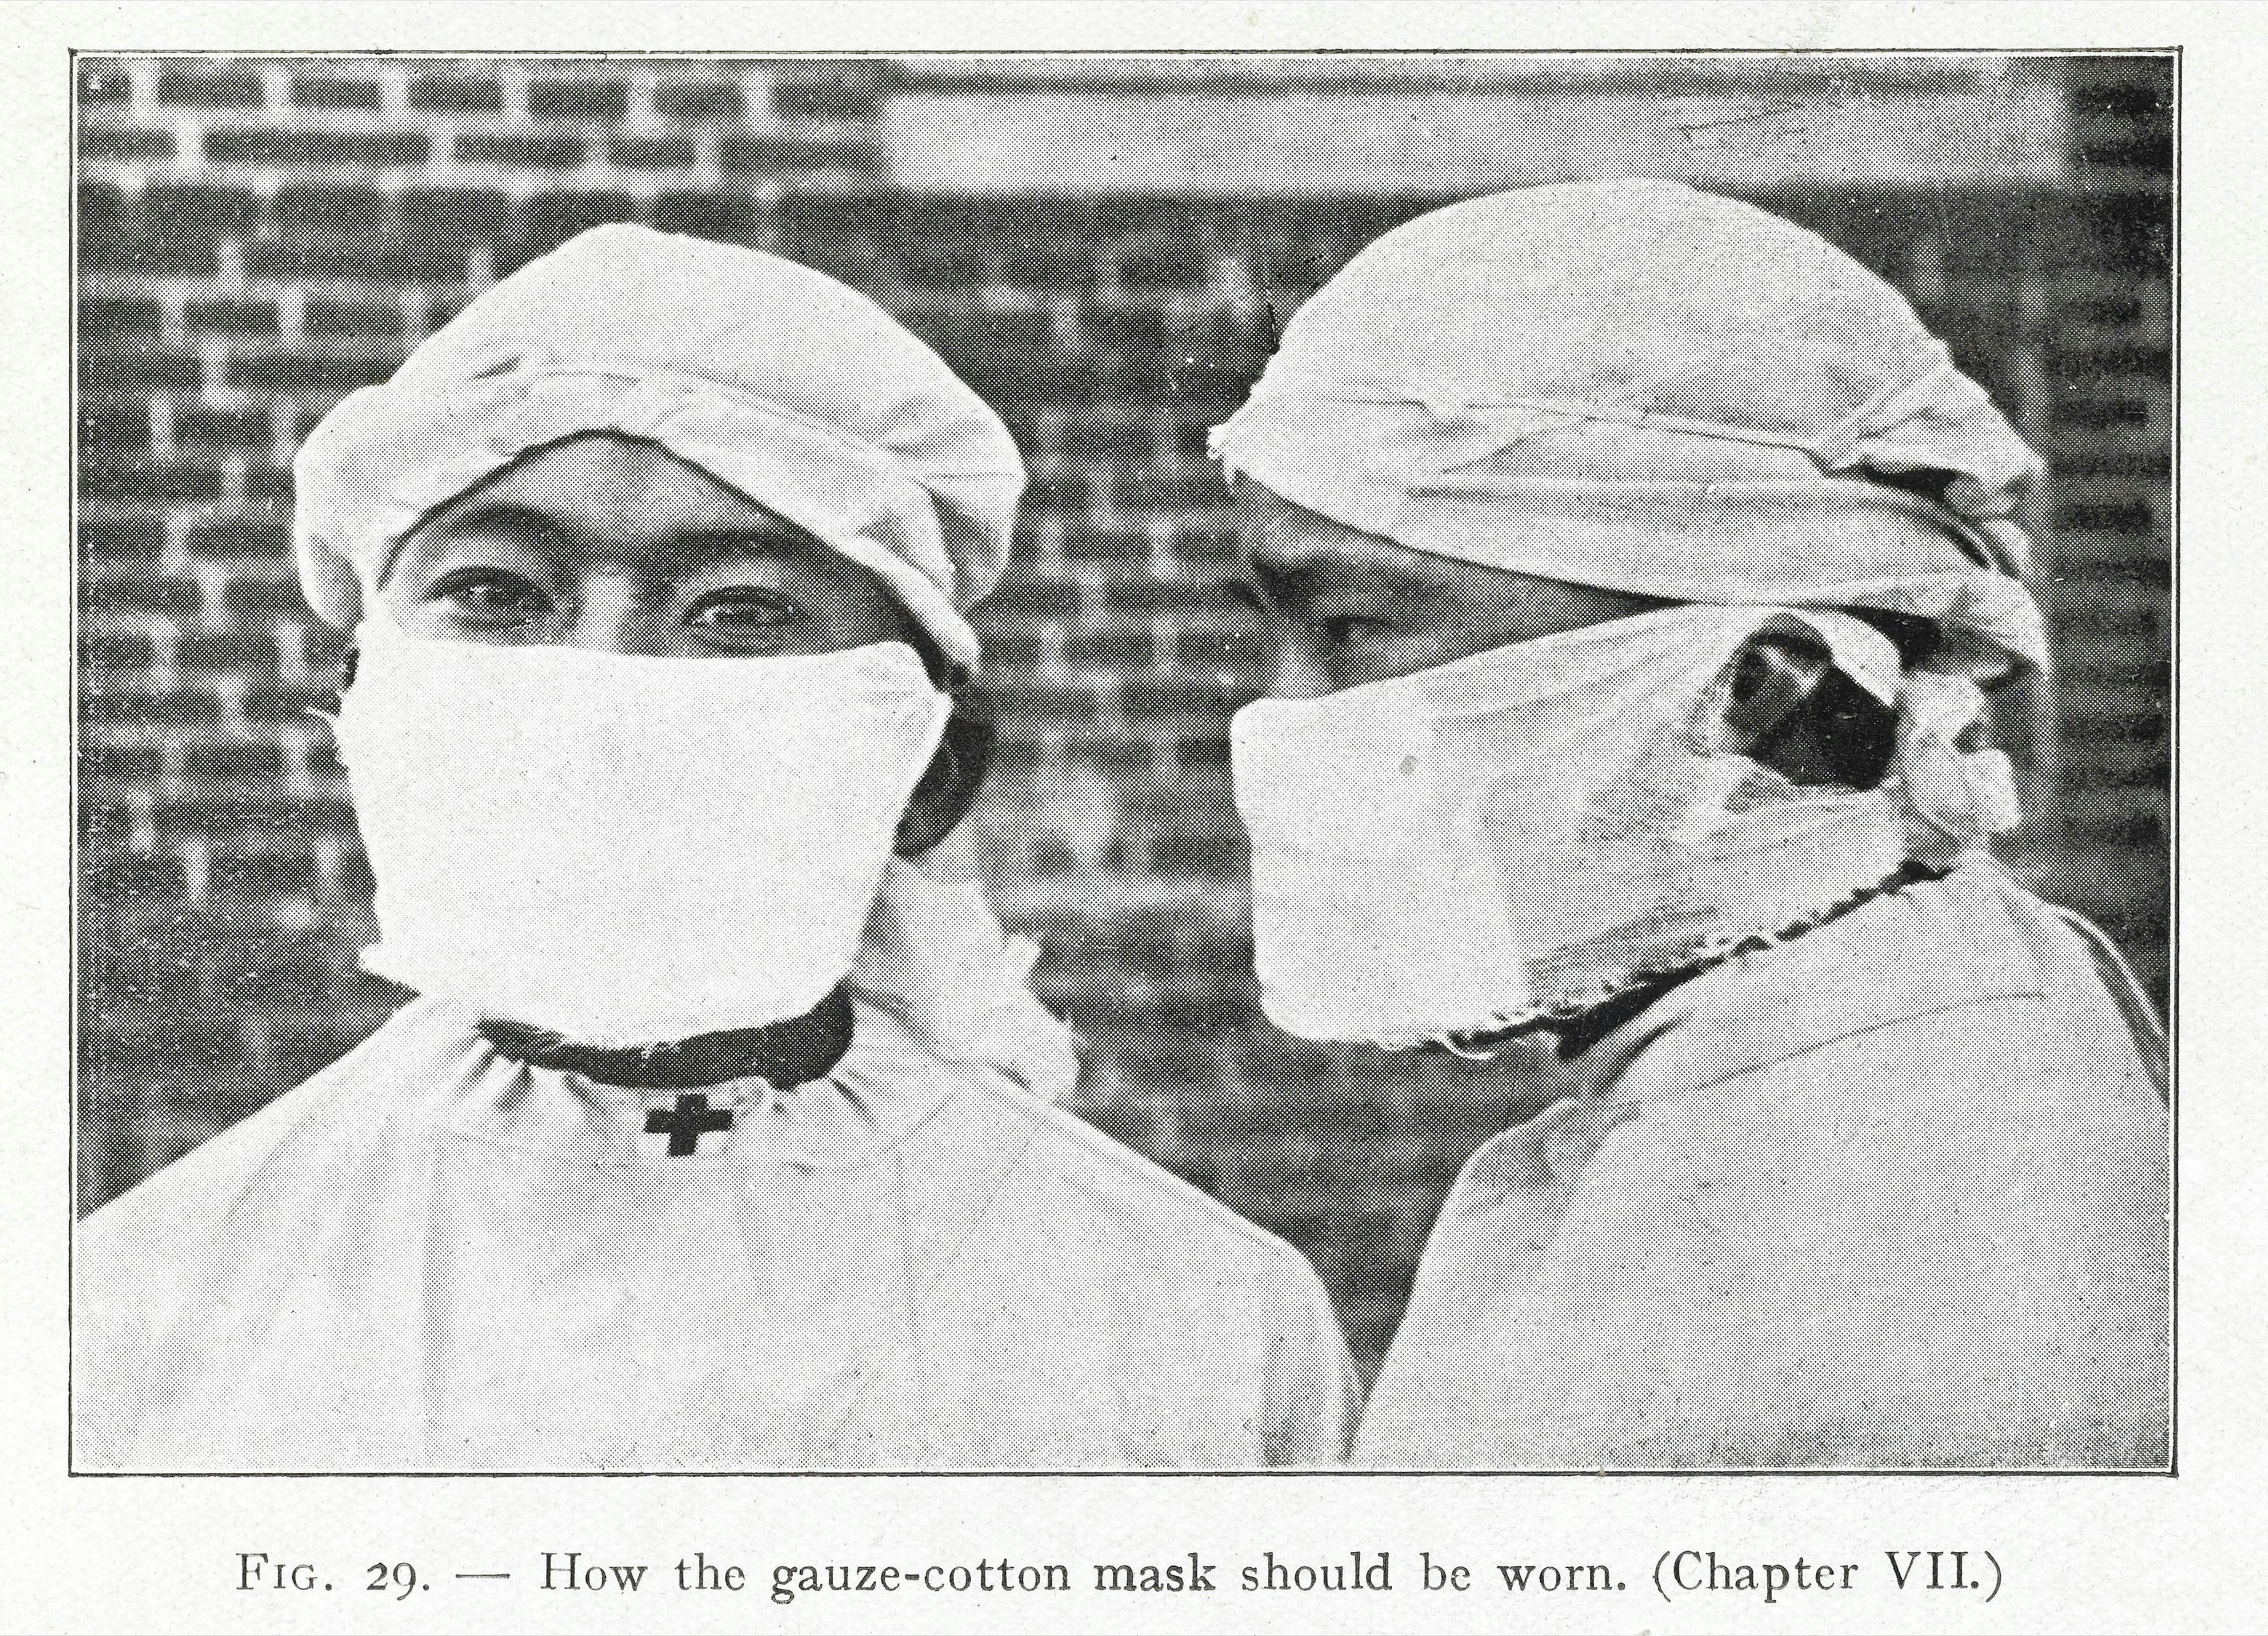 A history of medical masks | Wellcome Collection